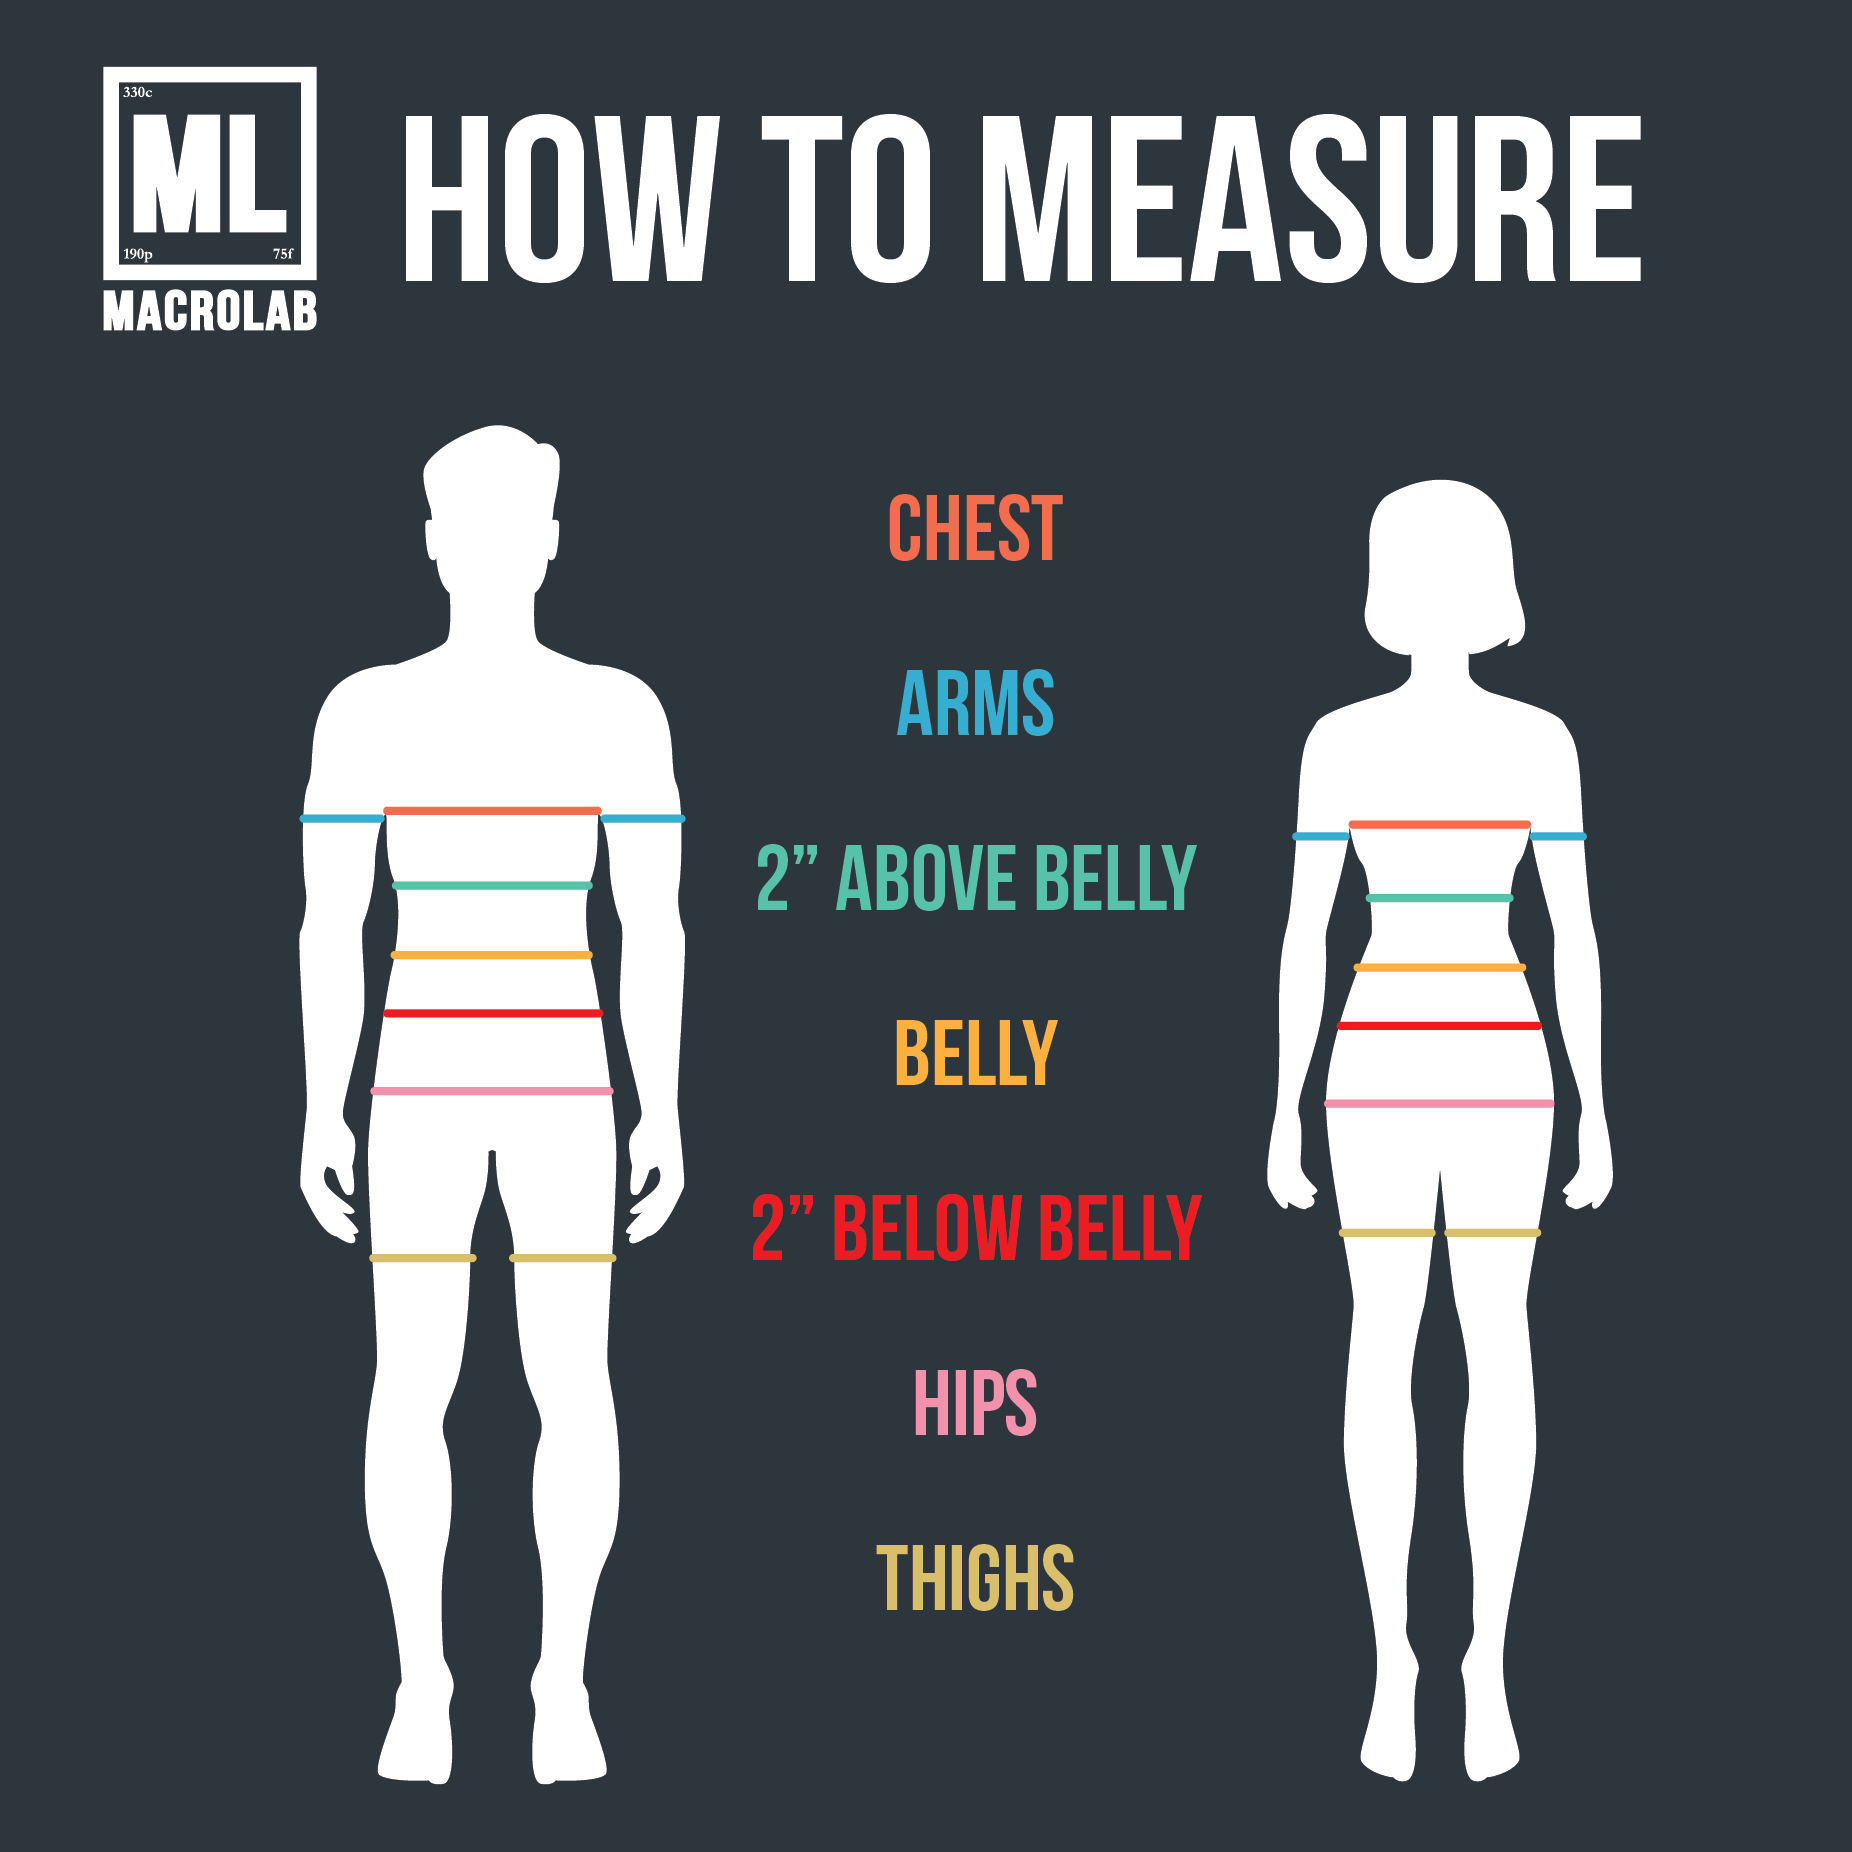 https://www.macrolab.com/wp-content/uploads/2020/01/how-to-properly-take-body-measurements.png